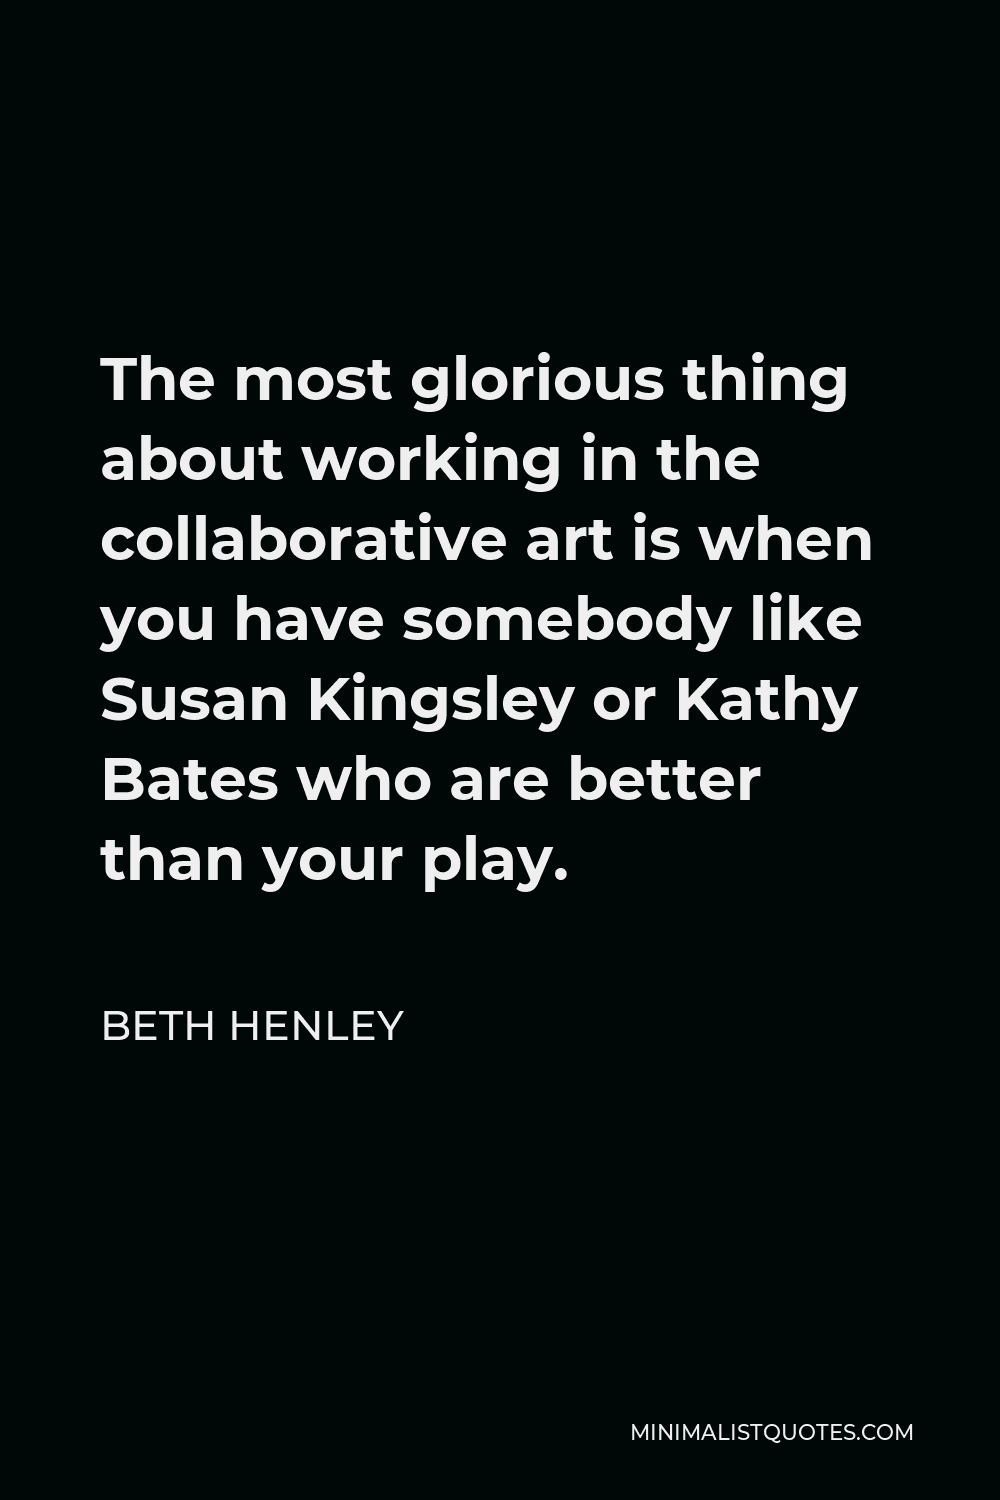 Beth Henley Quote - The most glorious thing about working in the collaborative art is when you have somebody like Susan Kingsley or Kathy Bates who are better than your play.